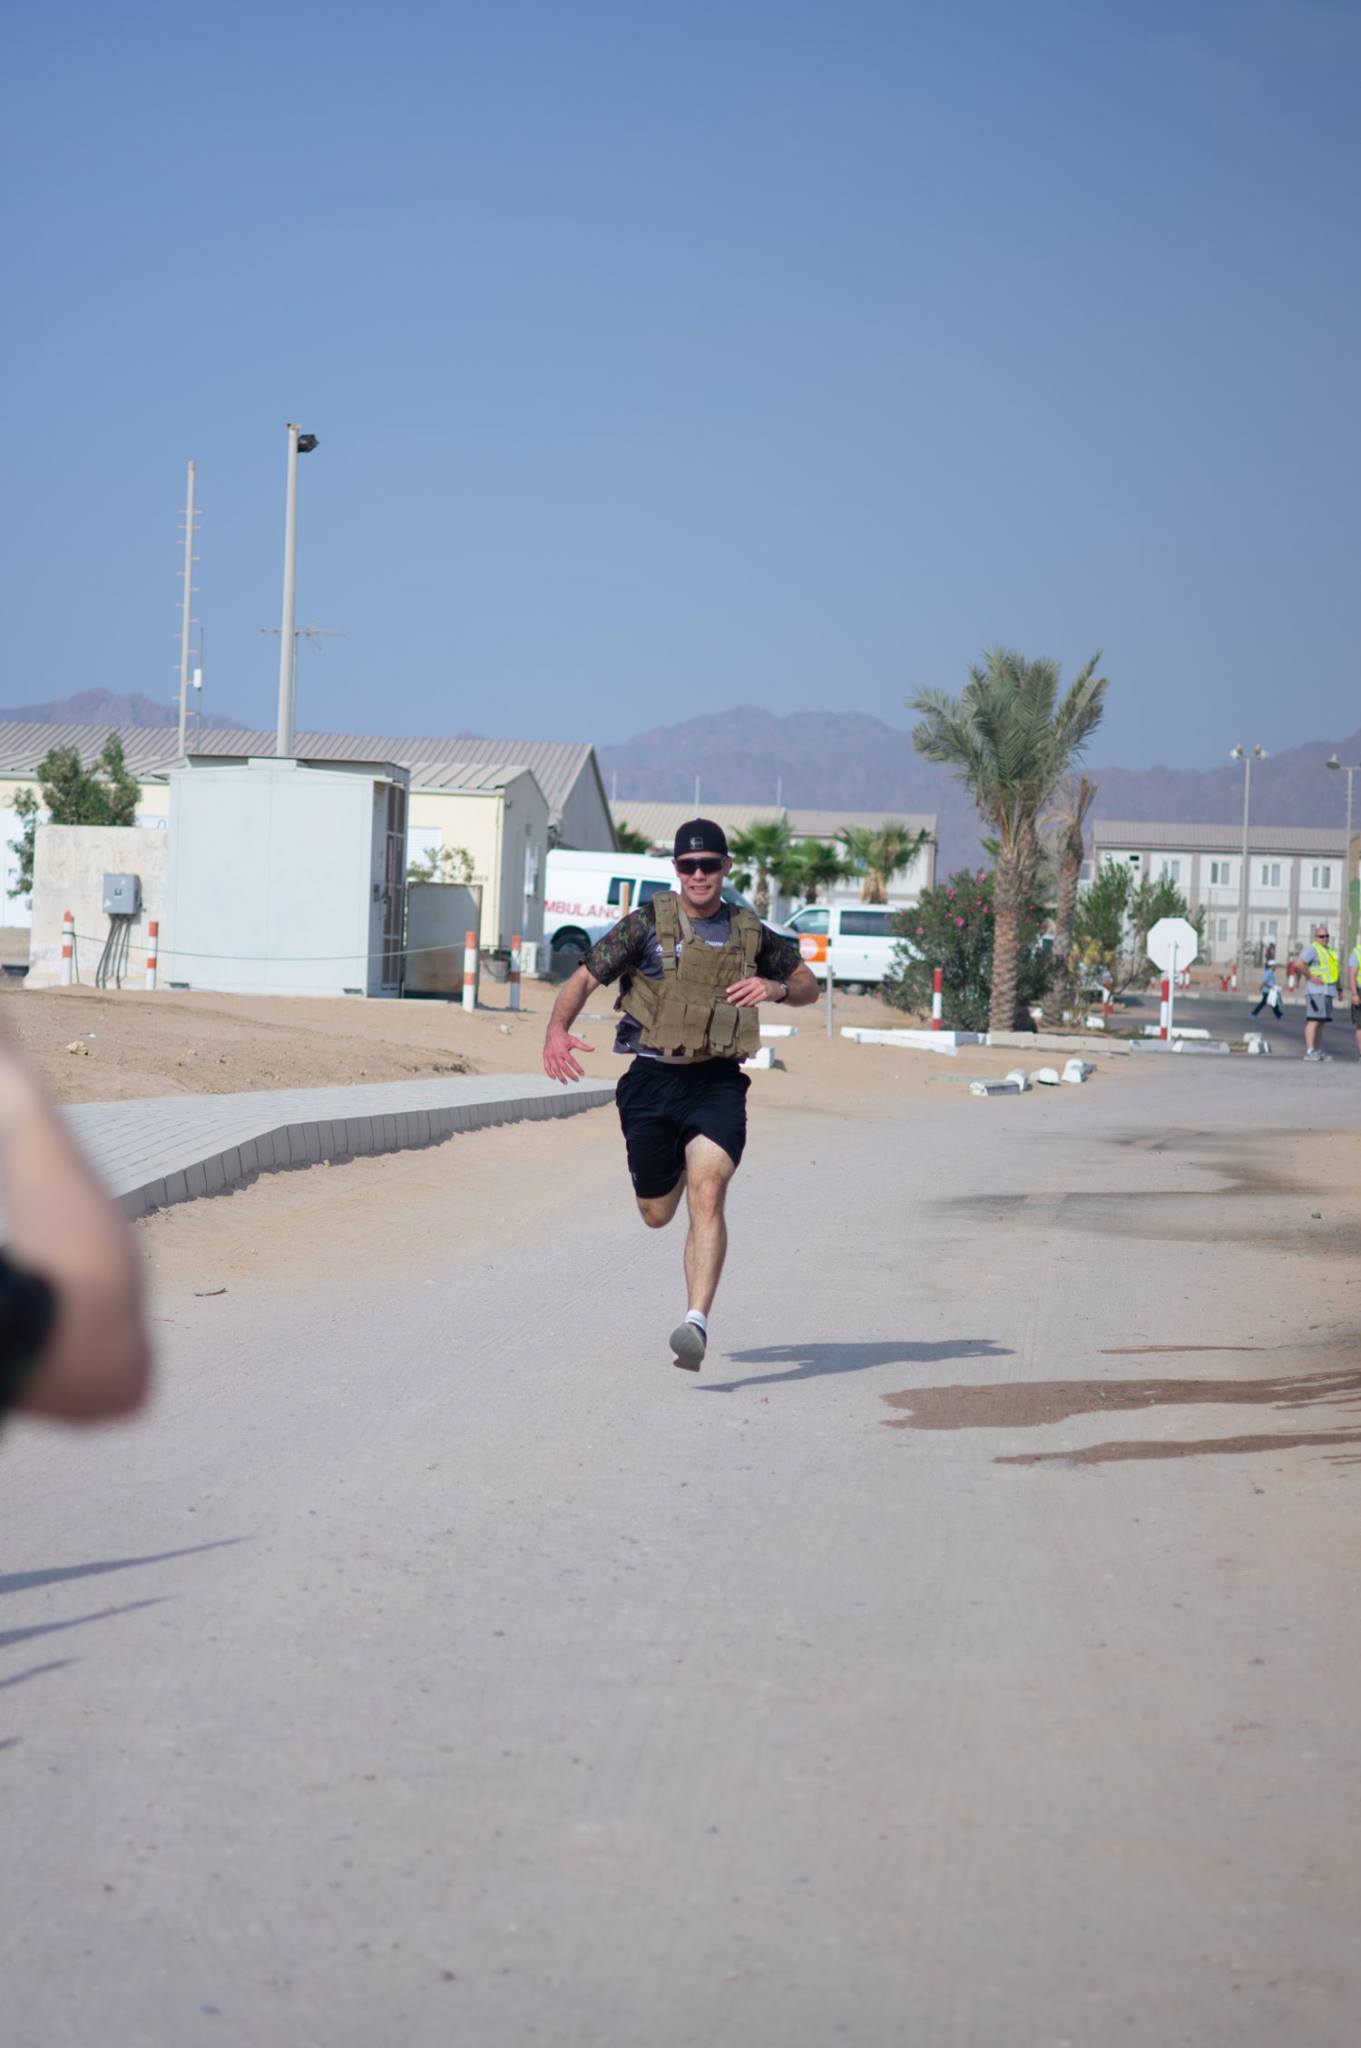 Sinai, Egypt. 28 September 2018 - Canadian Armed Forces members deployed on Operation CALUMET, along with troops and civilians from Australia, Czech Republic, Italy, New Zealand, Norway, Uruguay and the United States participate in a Shadow Canada Army Run in Sinai, Egypt. (Photo Credit : Multinational Force and Observers Press and Visits Office.)